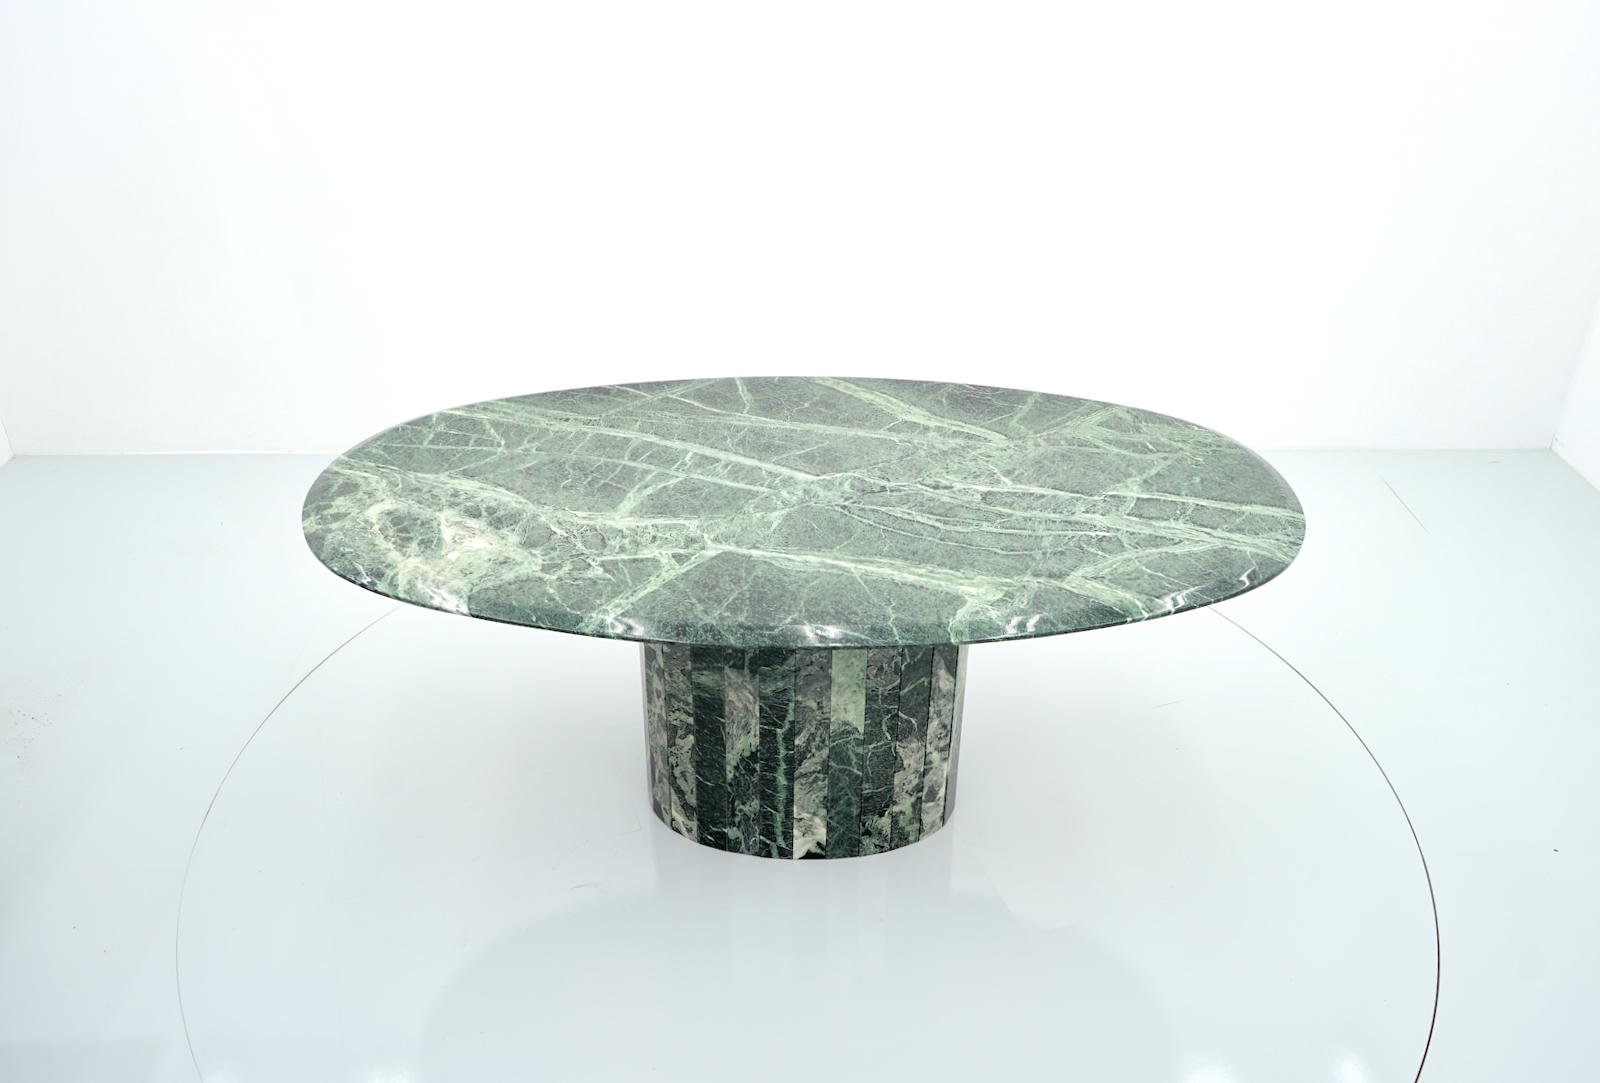 Amazing large oval dining table in green marble. The table has no damage and no repairs. 
The table dates back to the 1970s and comes from Italy. 
Very good condition without any damages, cracks or repairs. 

Details:

Creator: